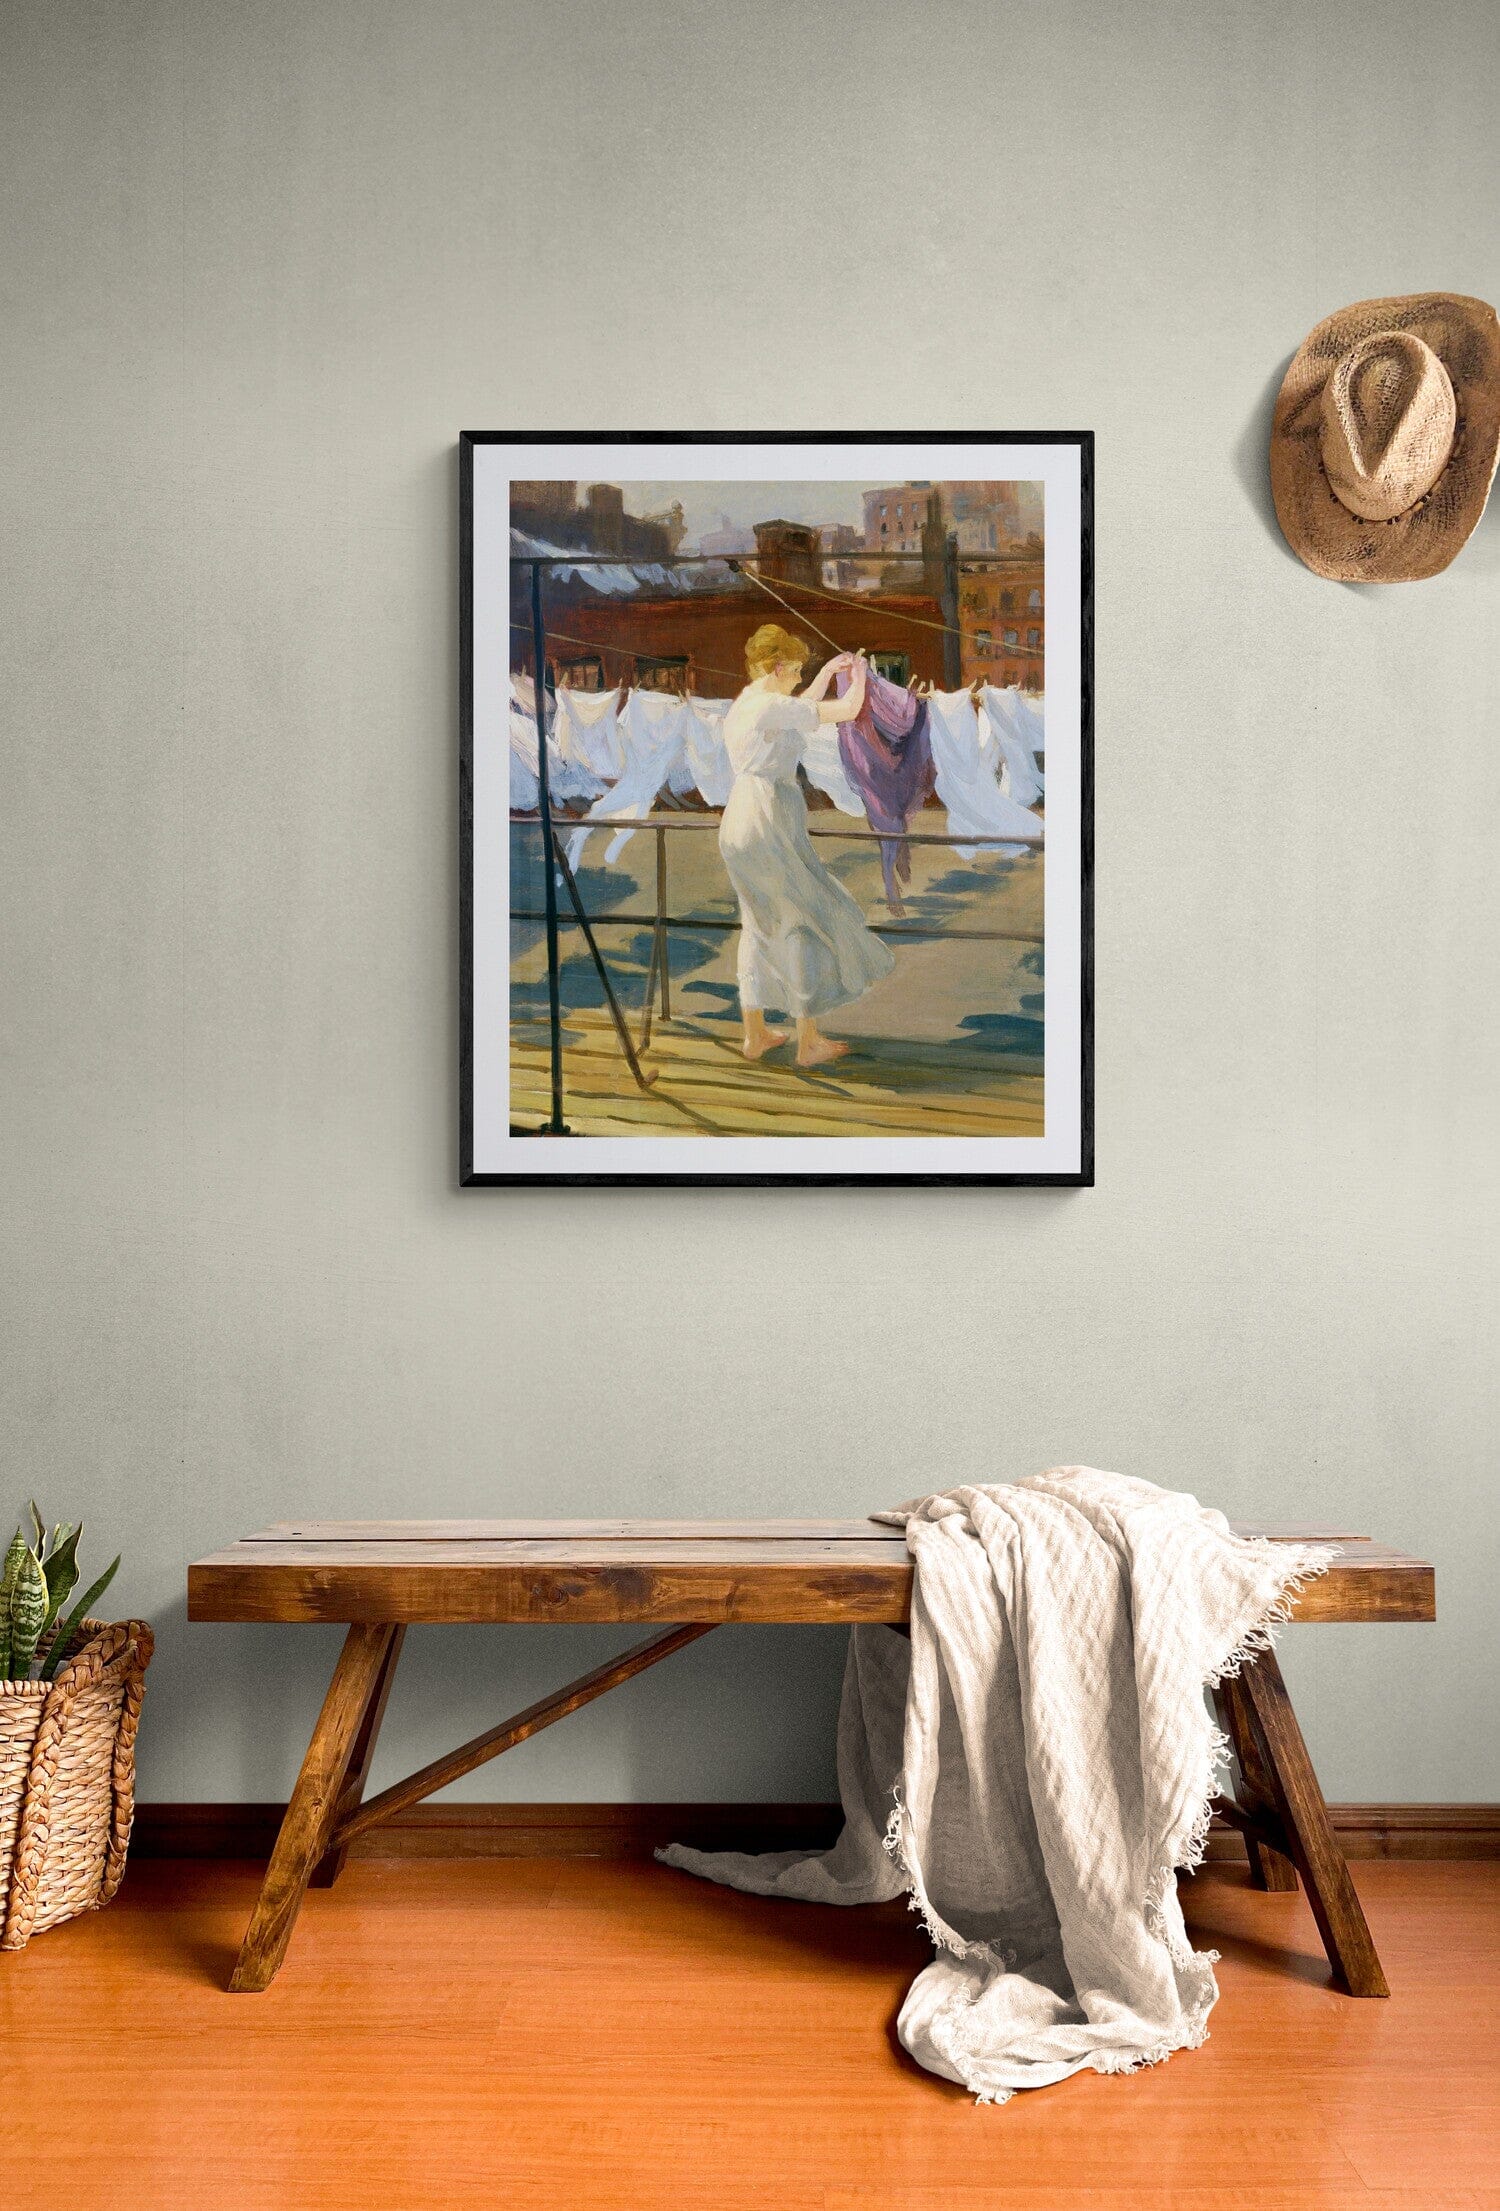 Rooftop laundry in sun and wind (1915) | Laundry room wall art | John Sloan Posters, Prints, & Visual Artwork The Trumpet Shop Vintage Prints   